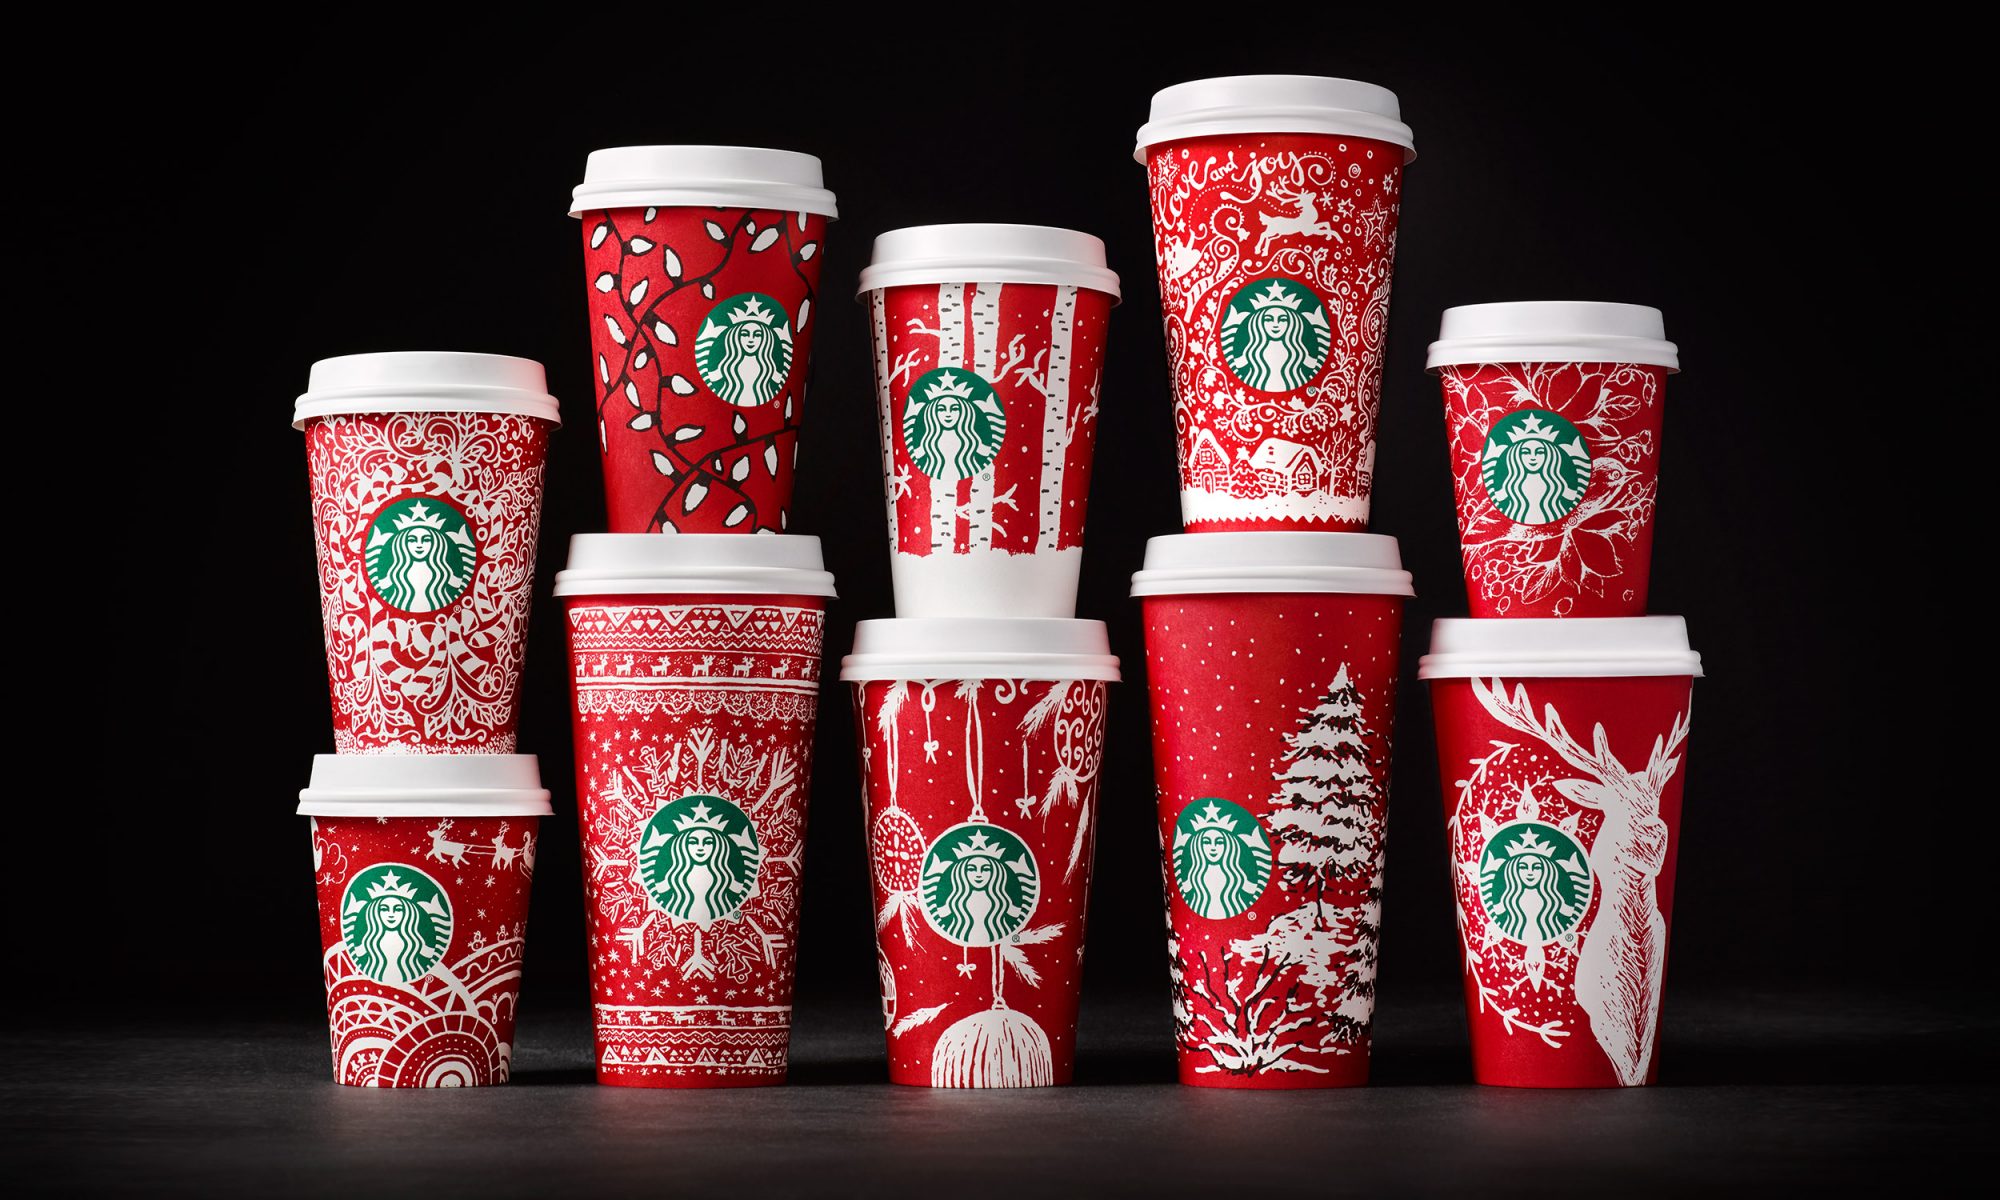 EC: New Starbucks Red Holiday Cups Are Revealed